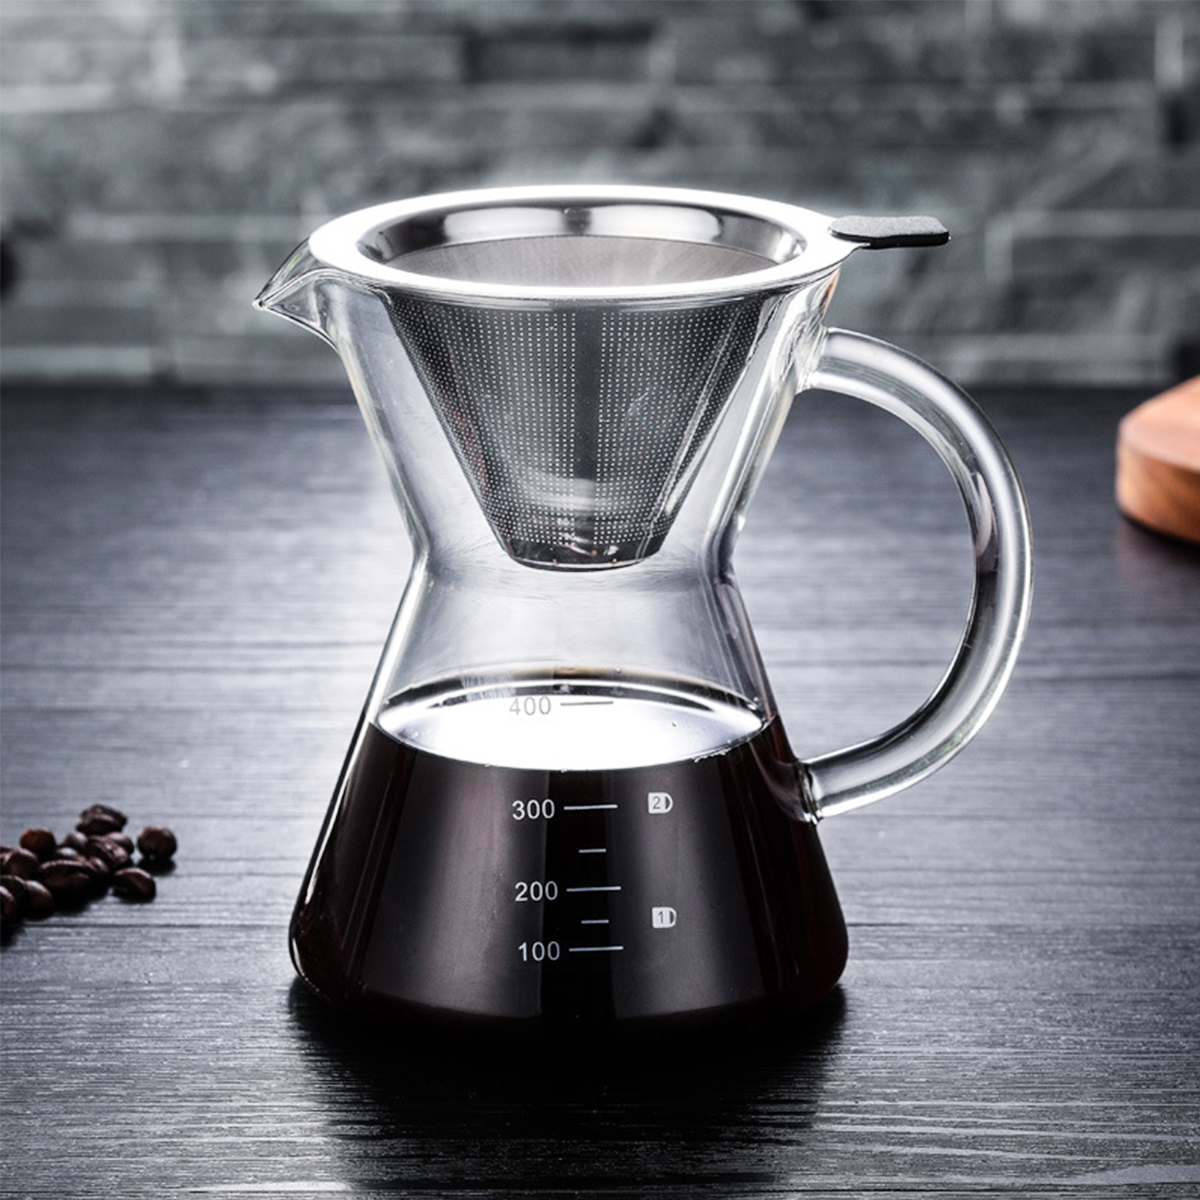 

400ml Classic Glass Pour Over Hand Drip Coffee Maker Pot & Steel Filter Net Portable Coffee Pot